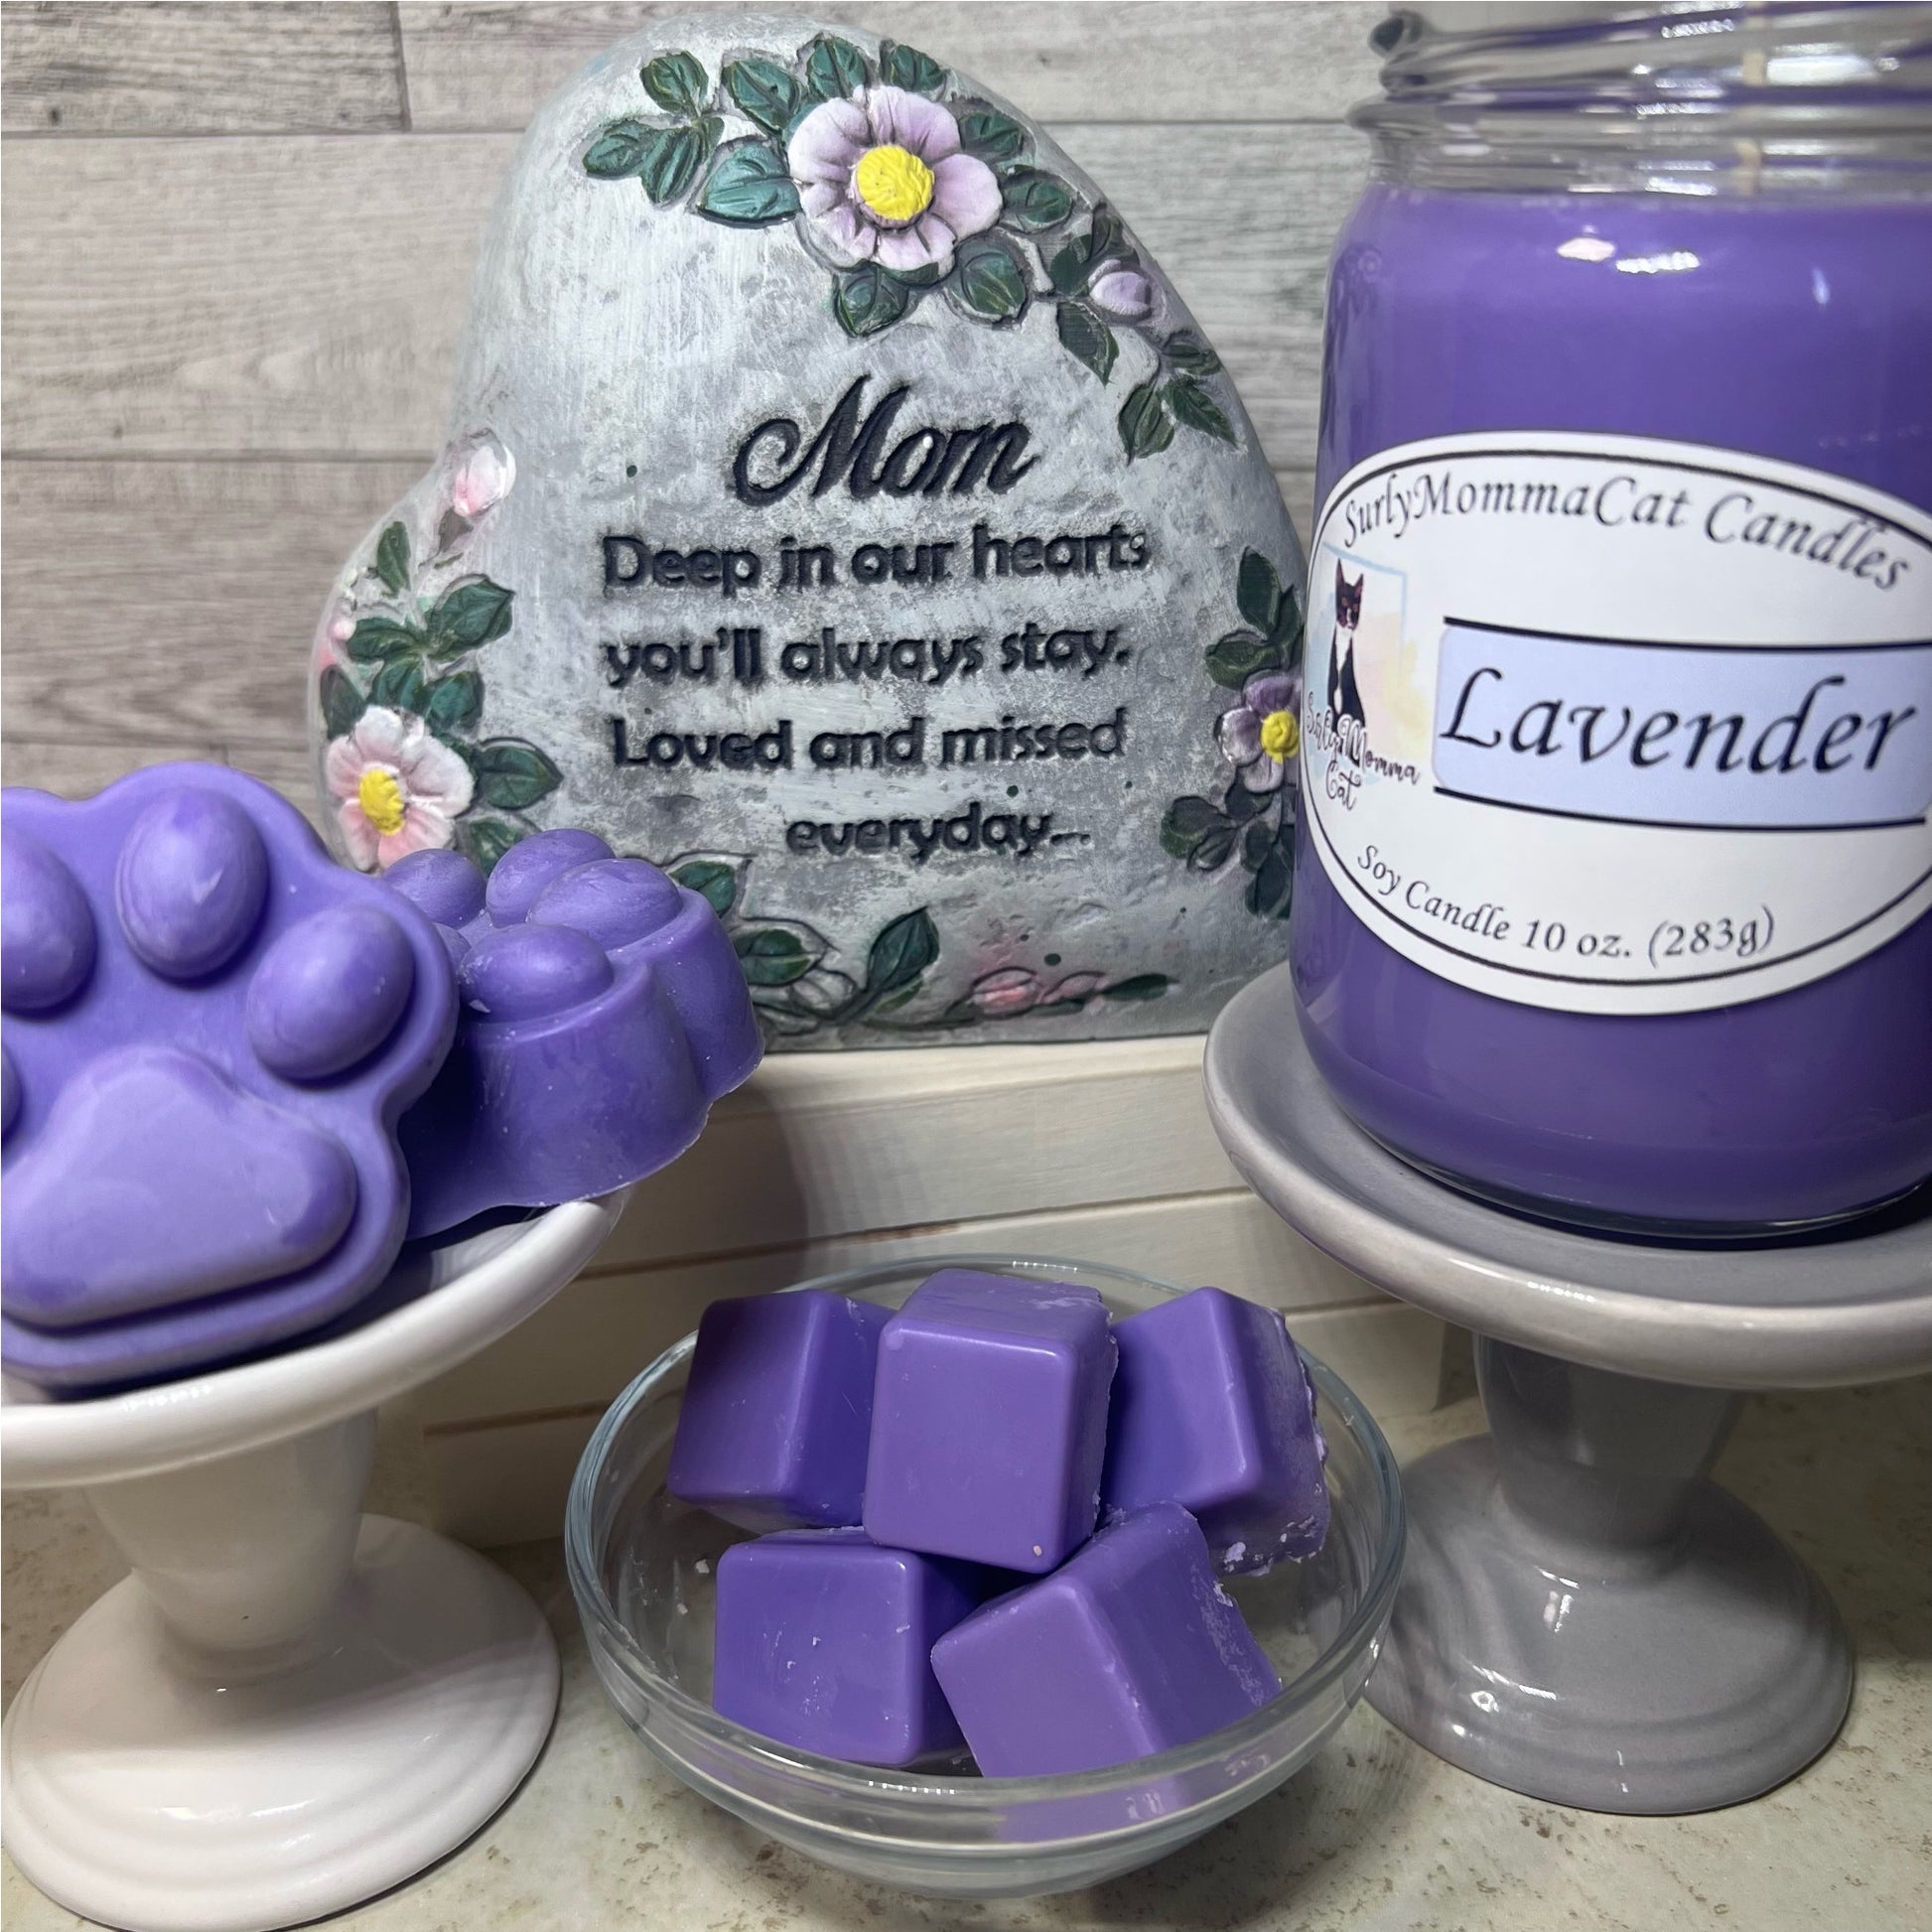 Purple Lavender Soy Glass Jar candle, Cubed wax melts, and Paw print wax melts, With a decorative stone that says"Mom Deep in our hearts you'll always stay. Loved and missed everyday..."